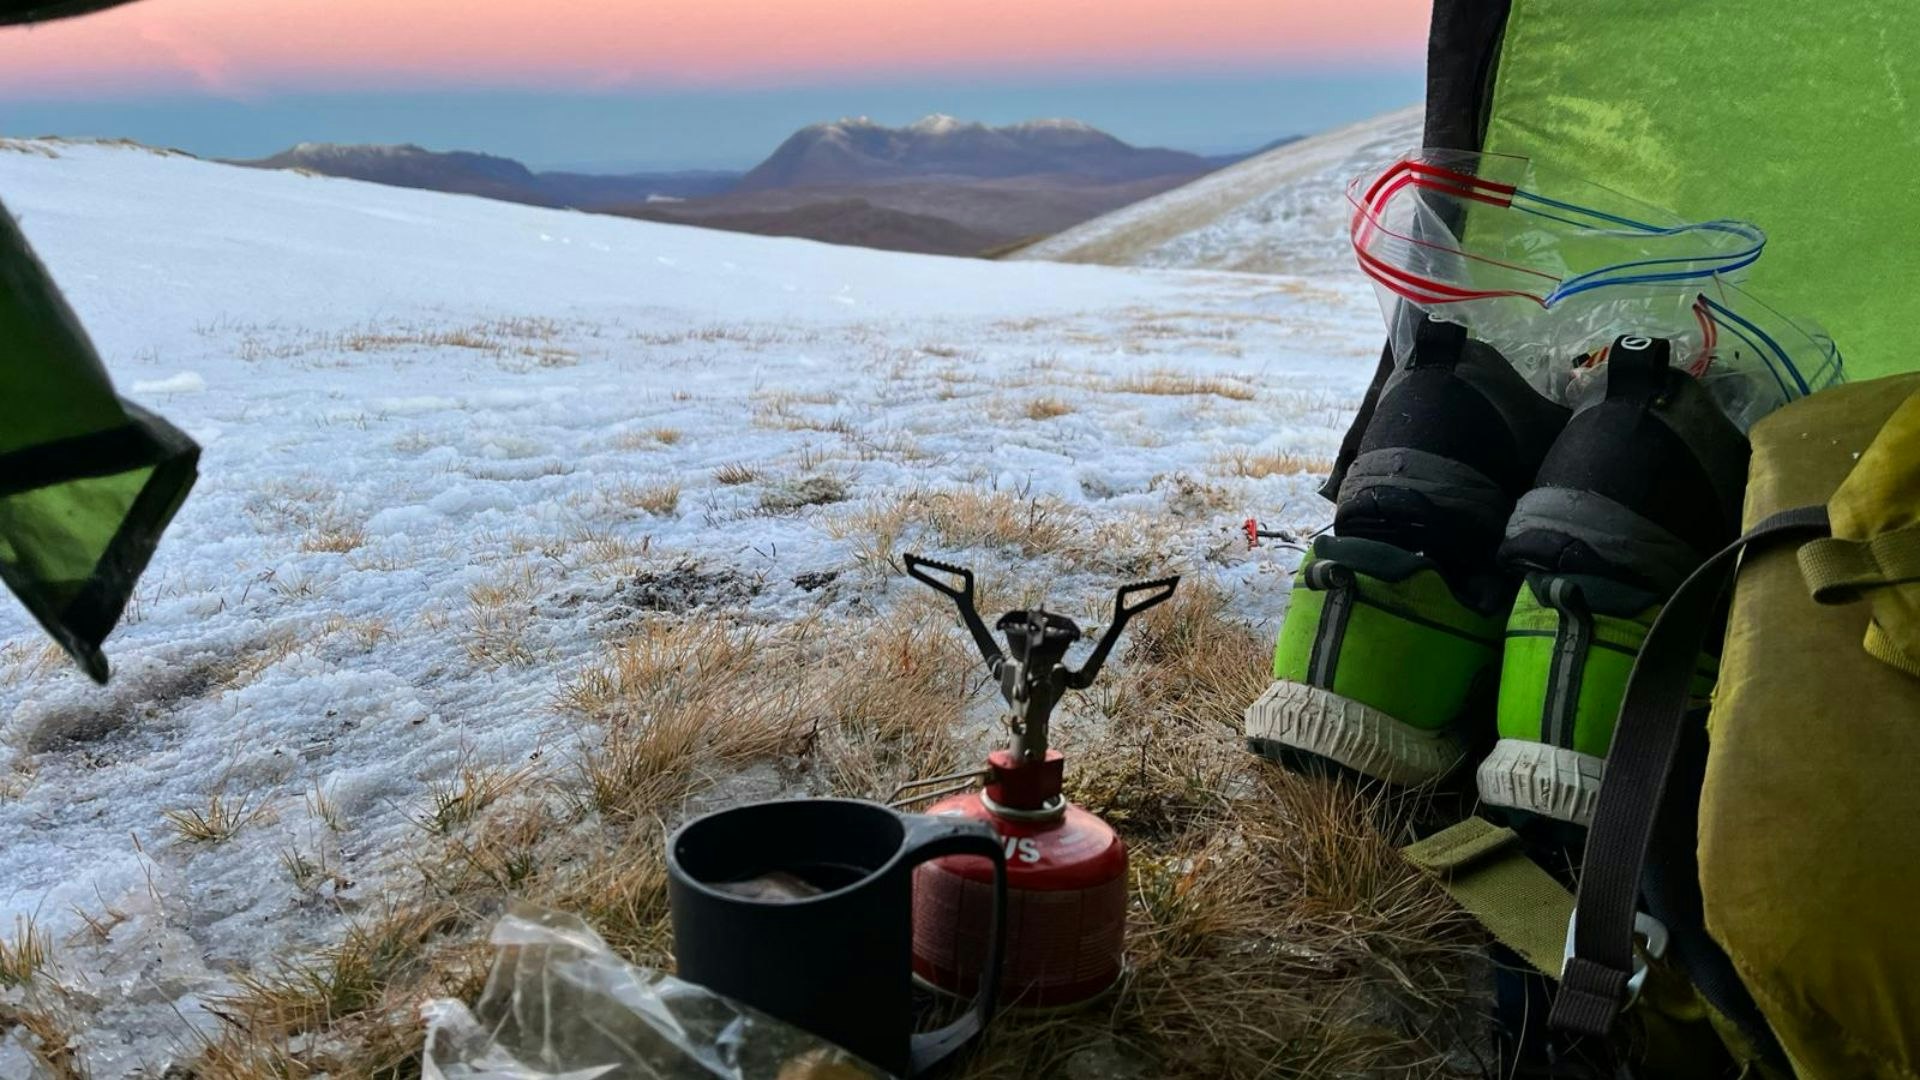 Stove overlooking a cold and windy hilltop from the door of a tent